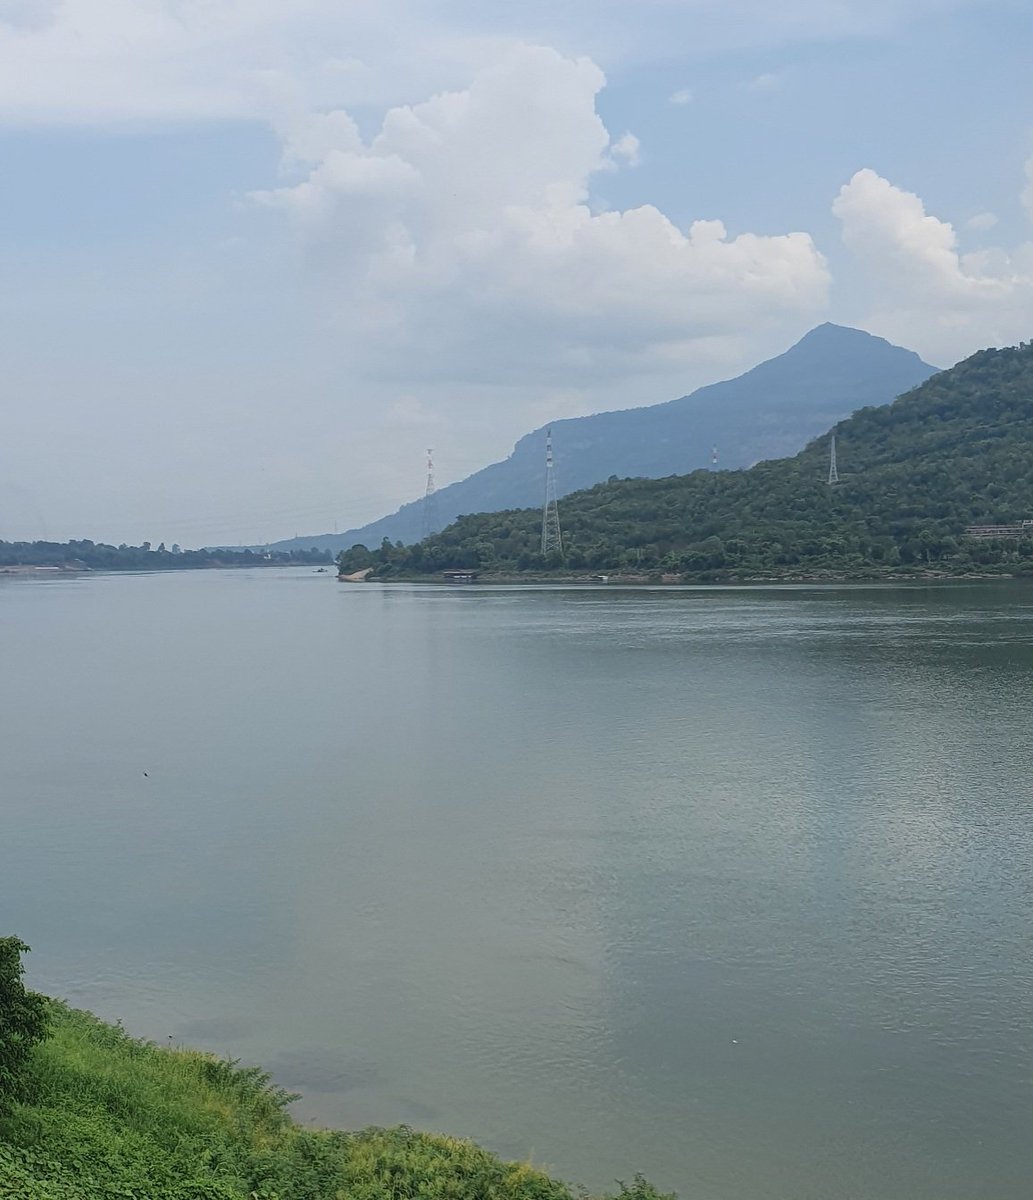 The Mekong in Pakse Laos - stunning. Crossed from Ubon at Vang Tao with Lao, Thai, Cambodian, Vietnamese officials going overland to Phnom Penh. @UNODC_SEAP looking at the Sithandon SEZ, doing an organized crime and trafficking assessment. A part of the region that needs focus